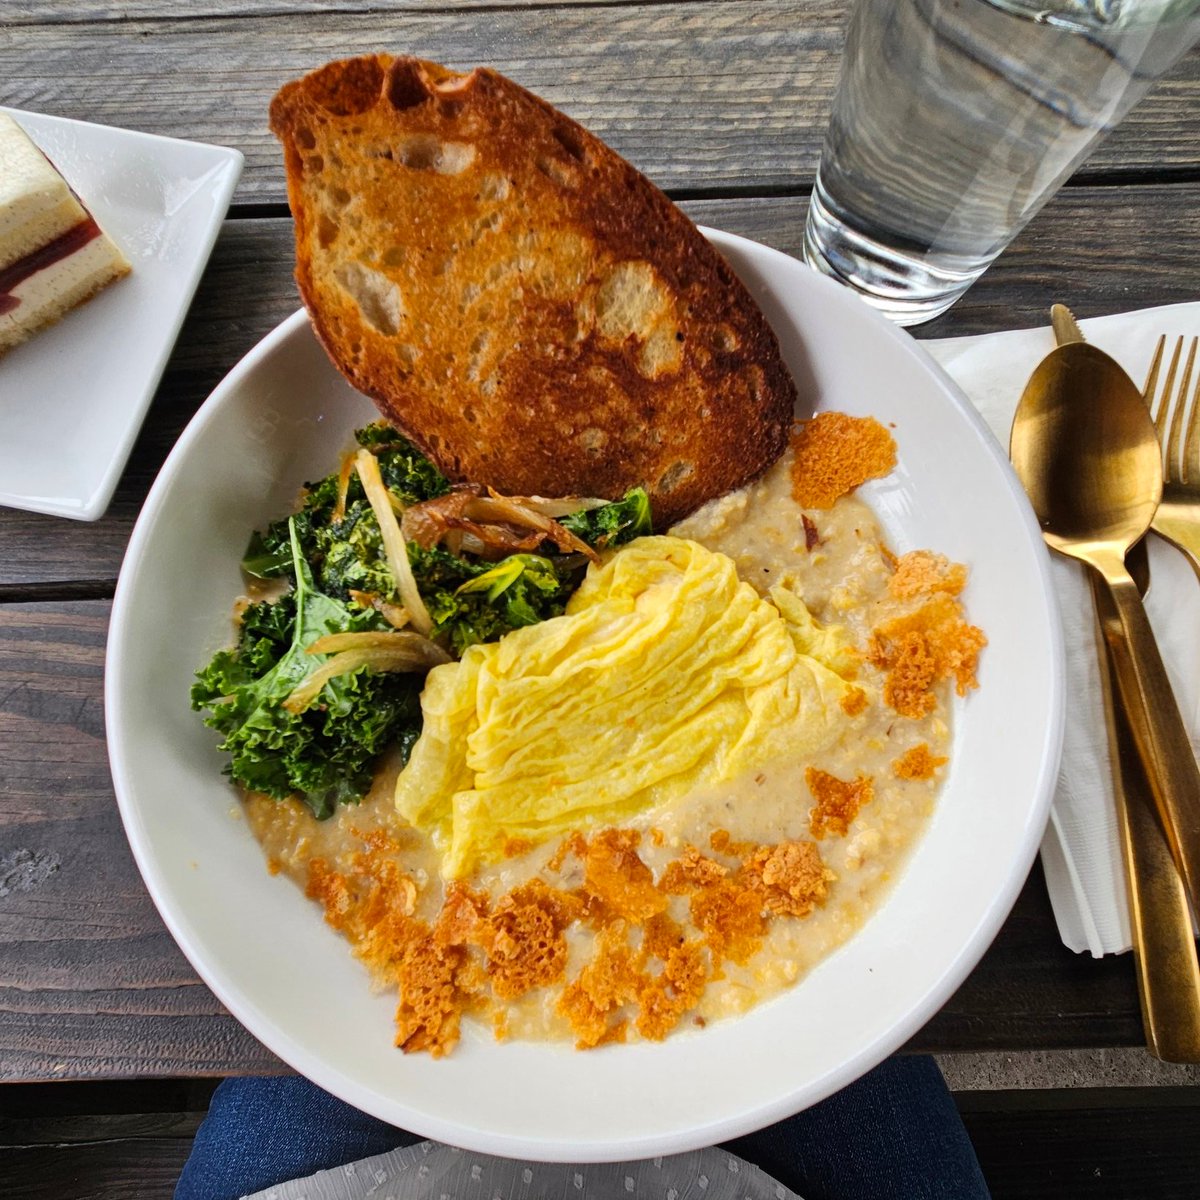 Was picking up a loaf of bread, it's close to lunchtime, & sometimes you just have to treat yourself to a nice hearty brunch. Grits with sauteed kale, caramelized onions, scrambled eggs, buttered toast & pan toasted cheese flakes. Loved it! 
West End Bakery in West Asheville.